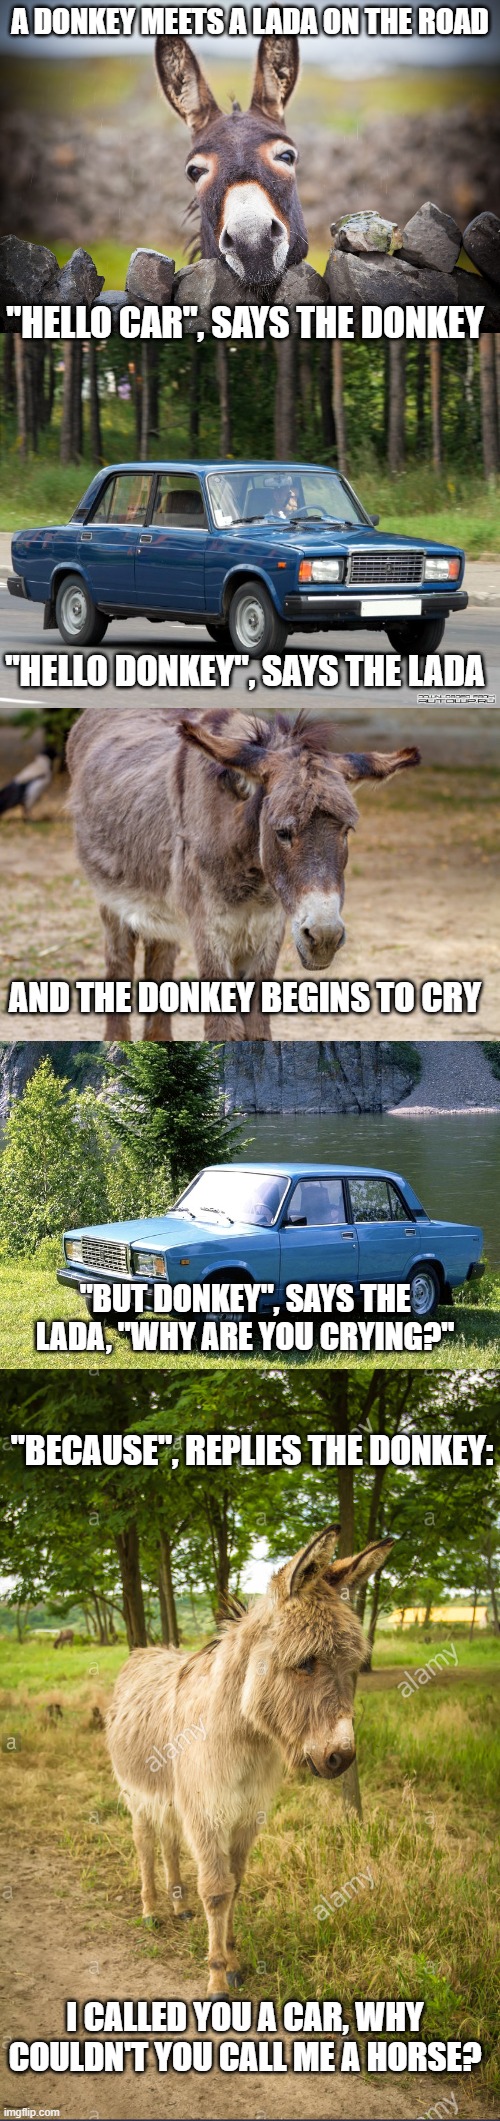 The donkey and the Lada | A DONKEY MEETS A LADA ON THE ROAD; "HELLO CAR", SAYS THE DONKEY; "HELLO DONKEY", SAYS THE LADA; AND THE DONKEY BEGINS TO CRY; "BUT DONKEY", SAYS THE LADA, "WHY ARE YOU CRYING?"; "BECAUSE", REPLIES THE DONKEY:; I CALLED YOU A CAR, WHY COULDN'T YOU CALL ME A HORSE? | image tagged in donkey,lada,joke | made w/ Imgflip meme maker